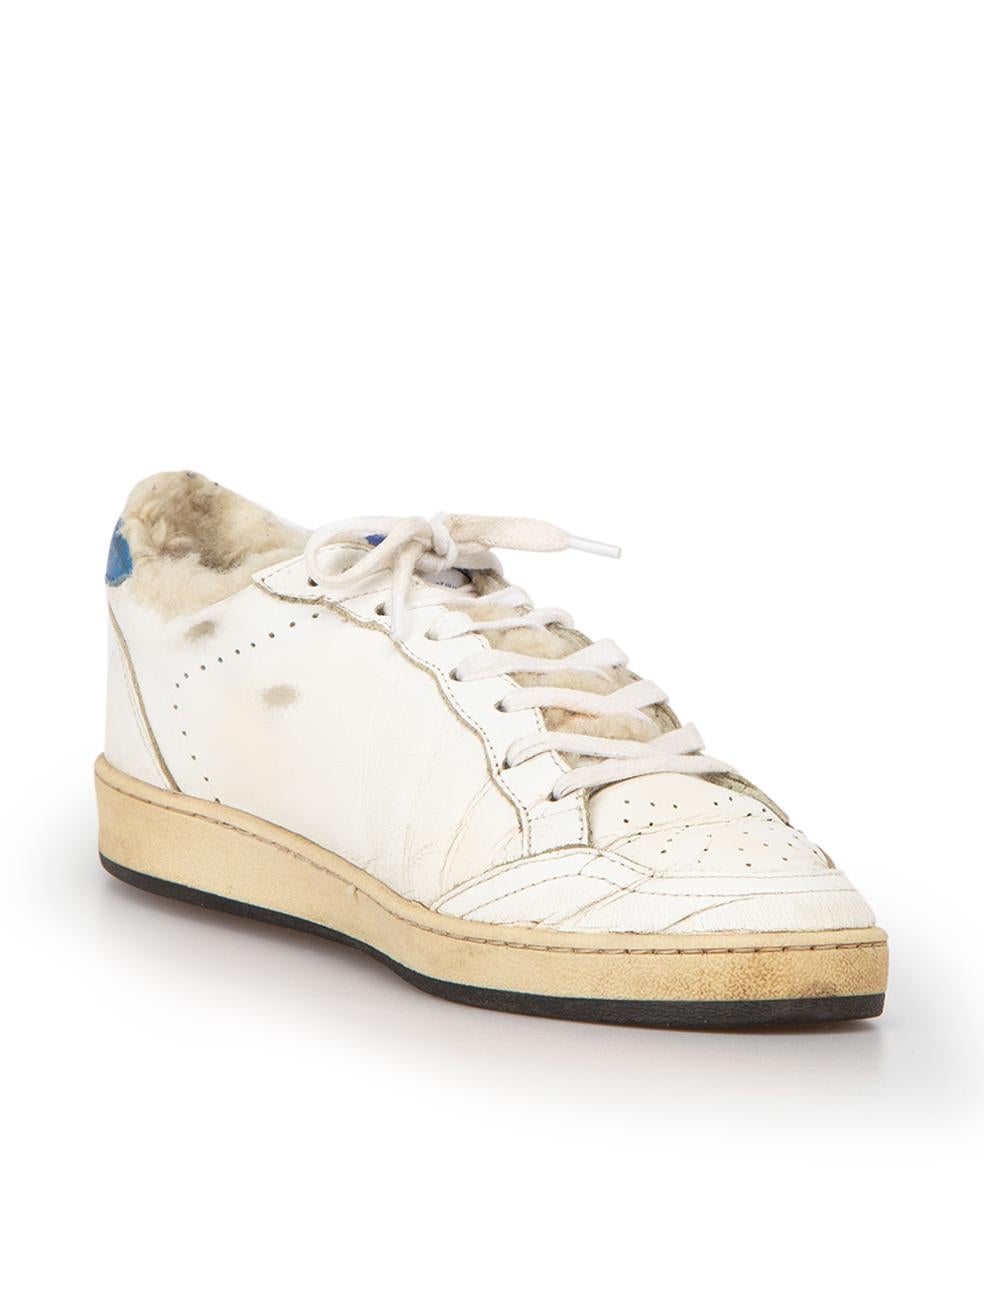 CONDITION is Good. General wear to shoes is evident. Moderate signs of wear to the soles of both trainers with marks, the toes of both are also creased with use and the shearling at the left-side of right shoe has worn away on this used GGDB